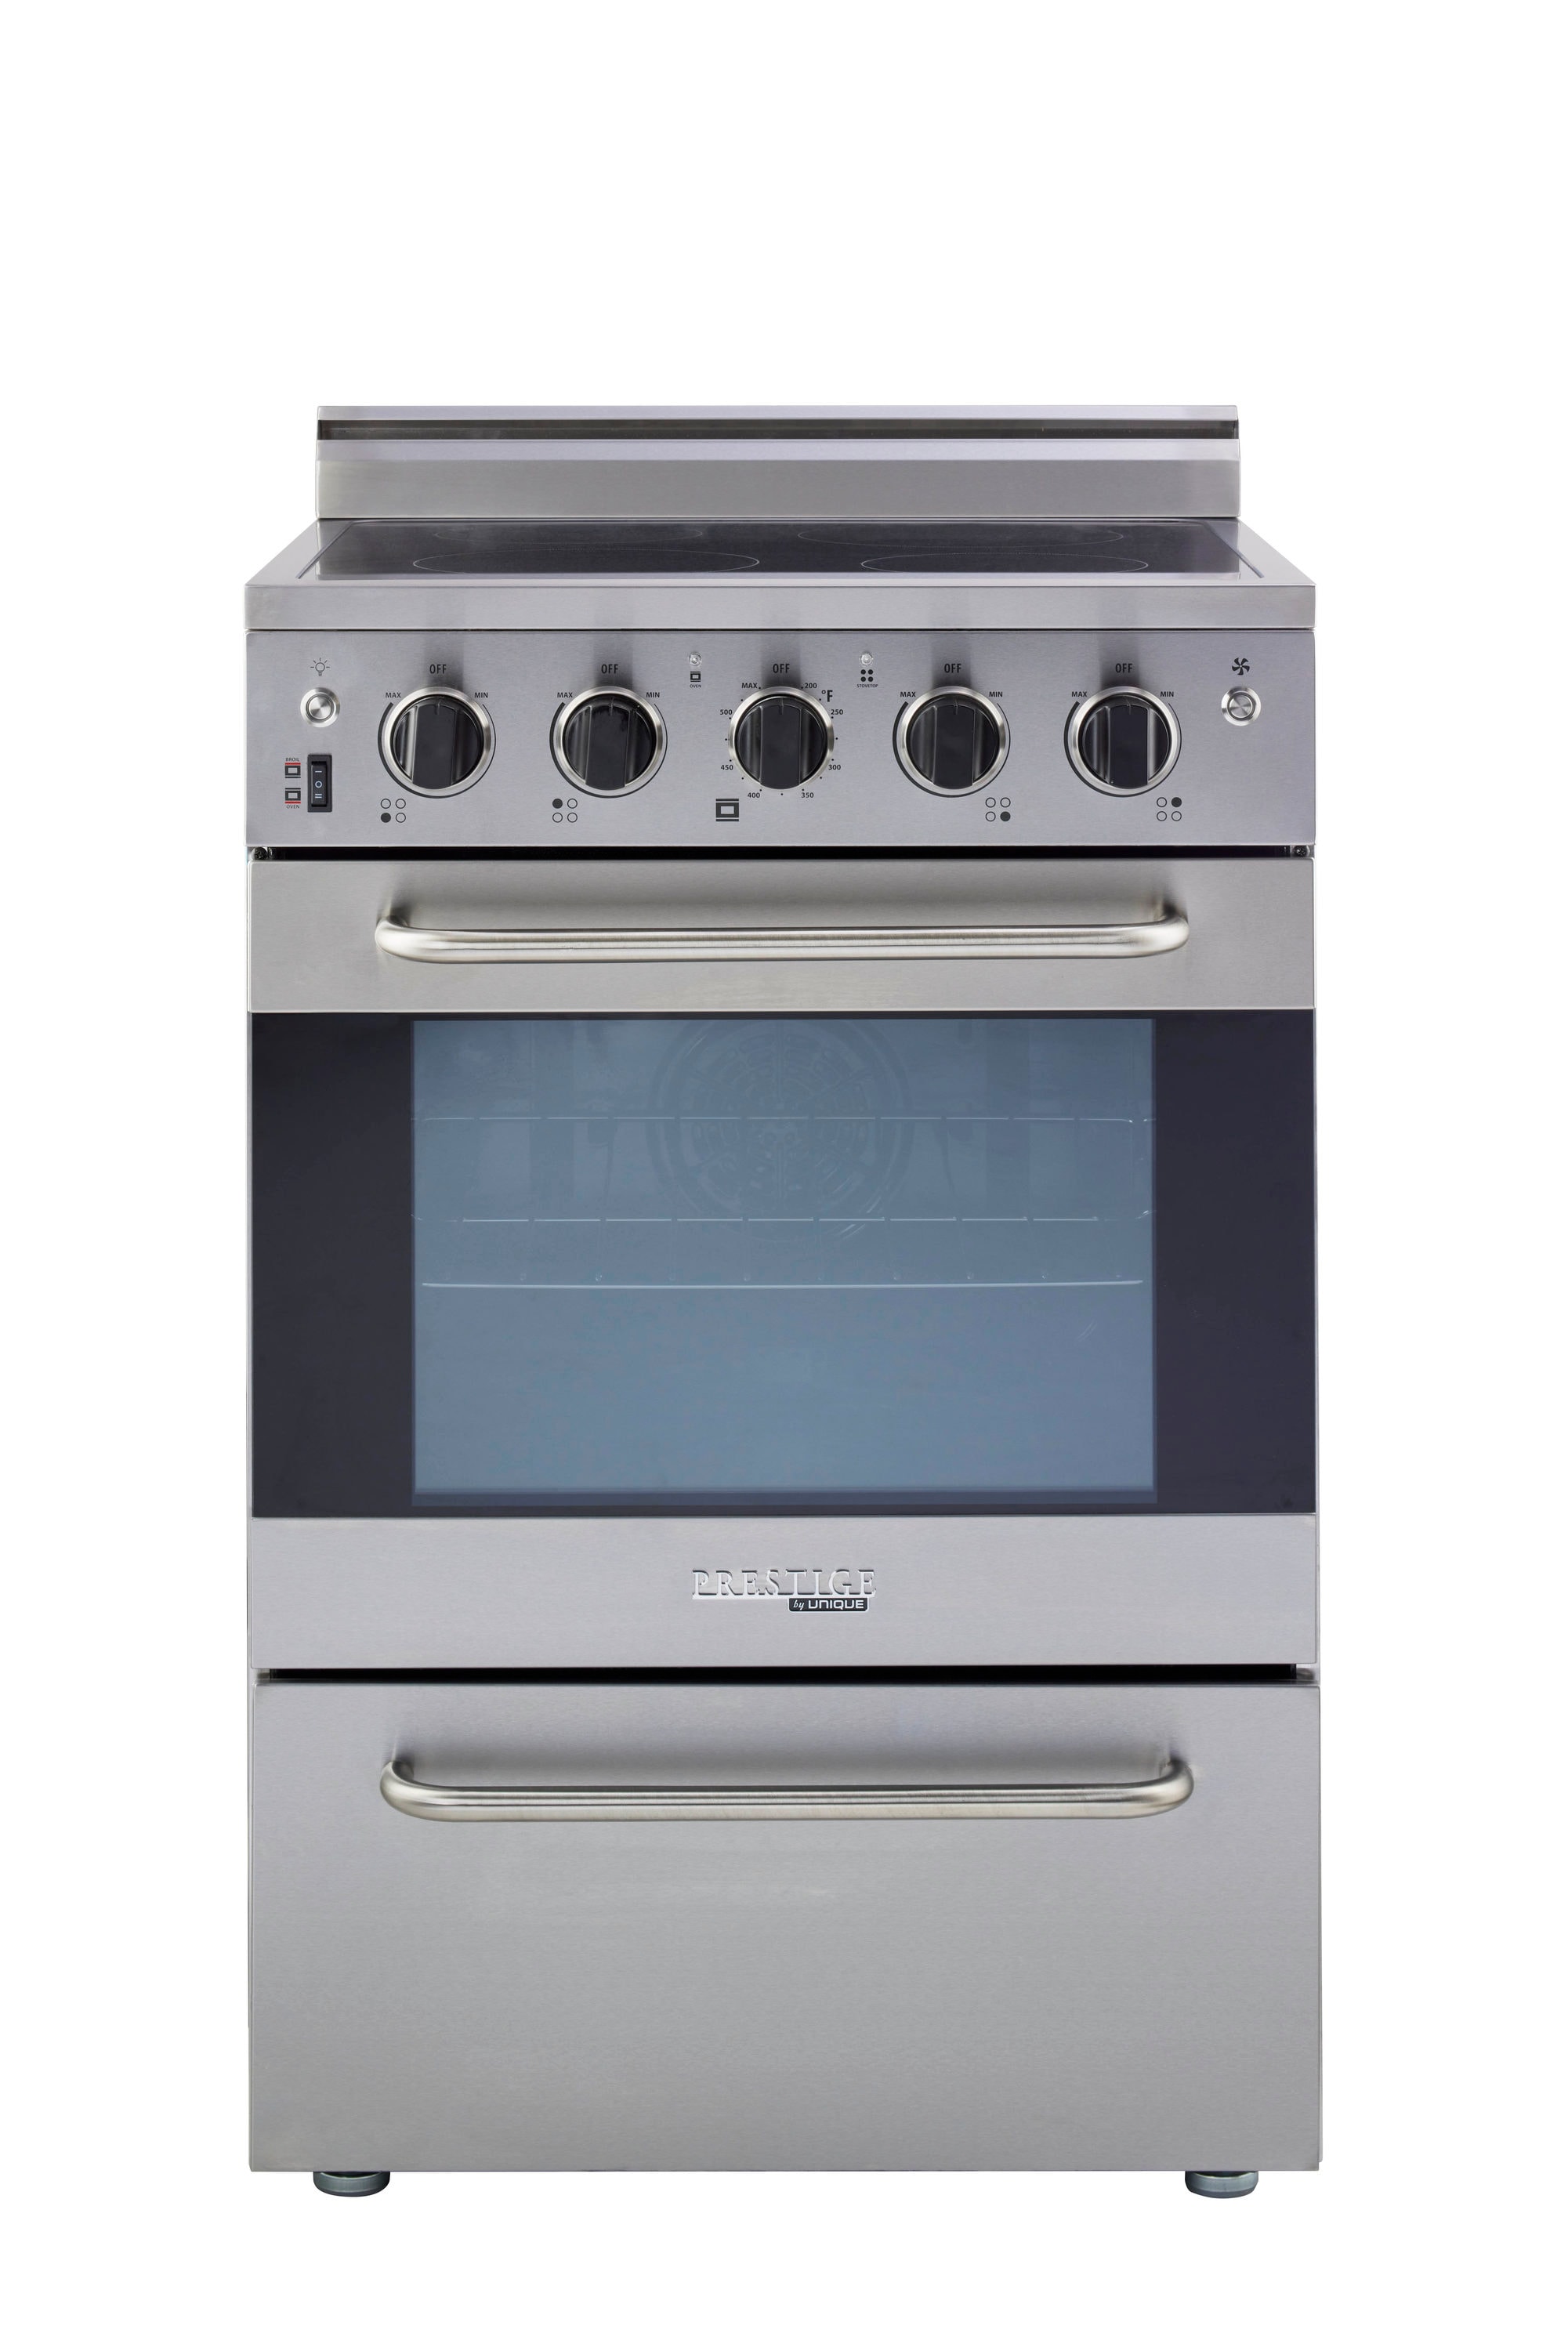 24 in. 2.2 cu. ft. Electric Range with Convection in Stainless Steel